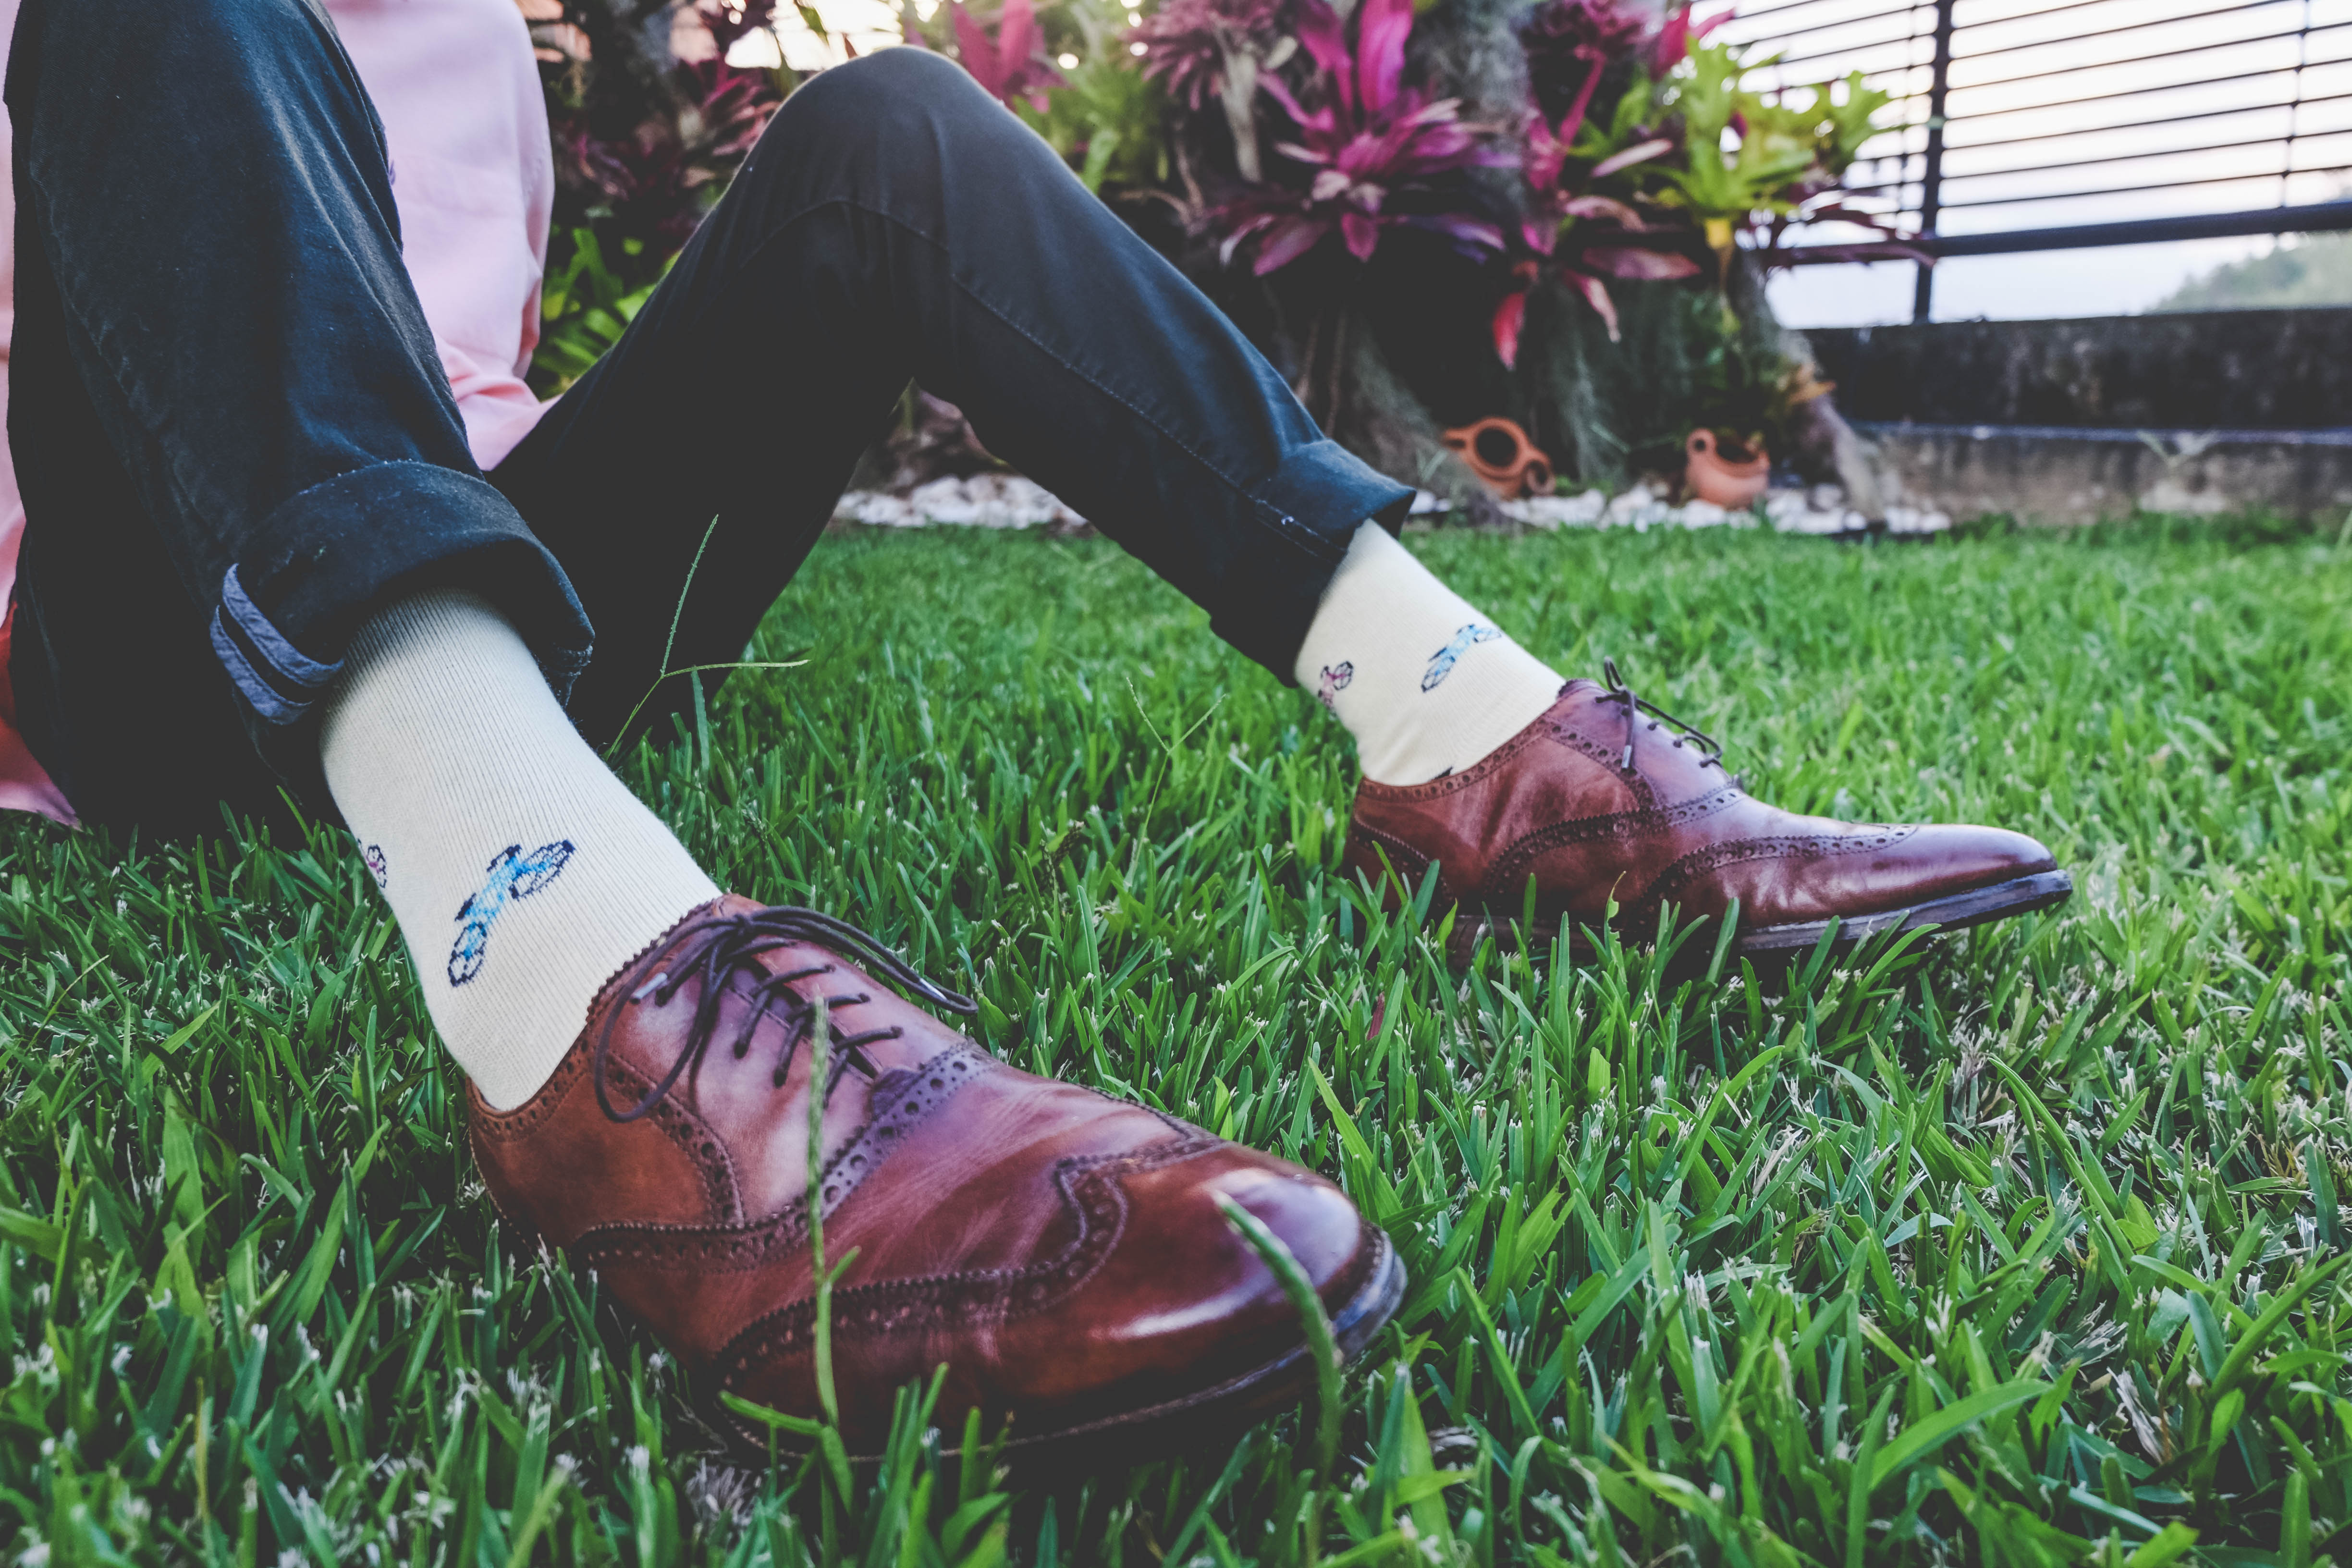 Yellows over the calf dress socks with cycle pattern, brown dress shoes, green pants